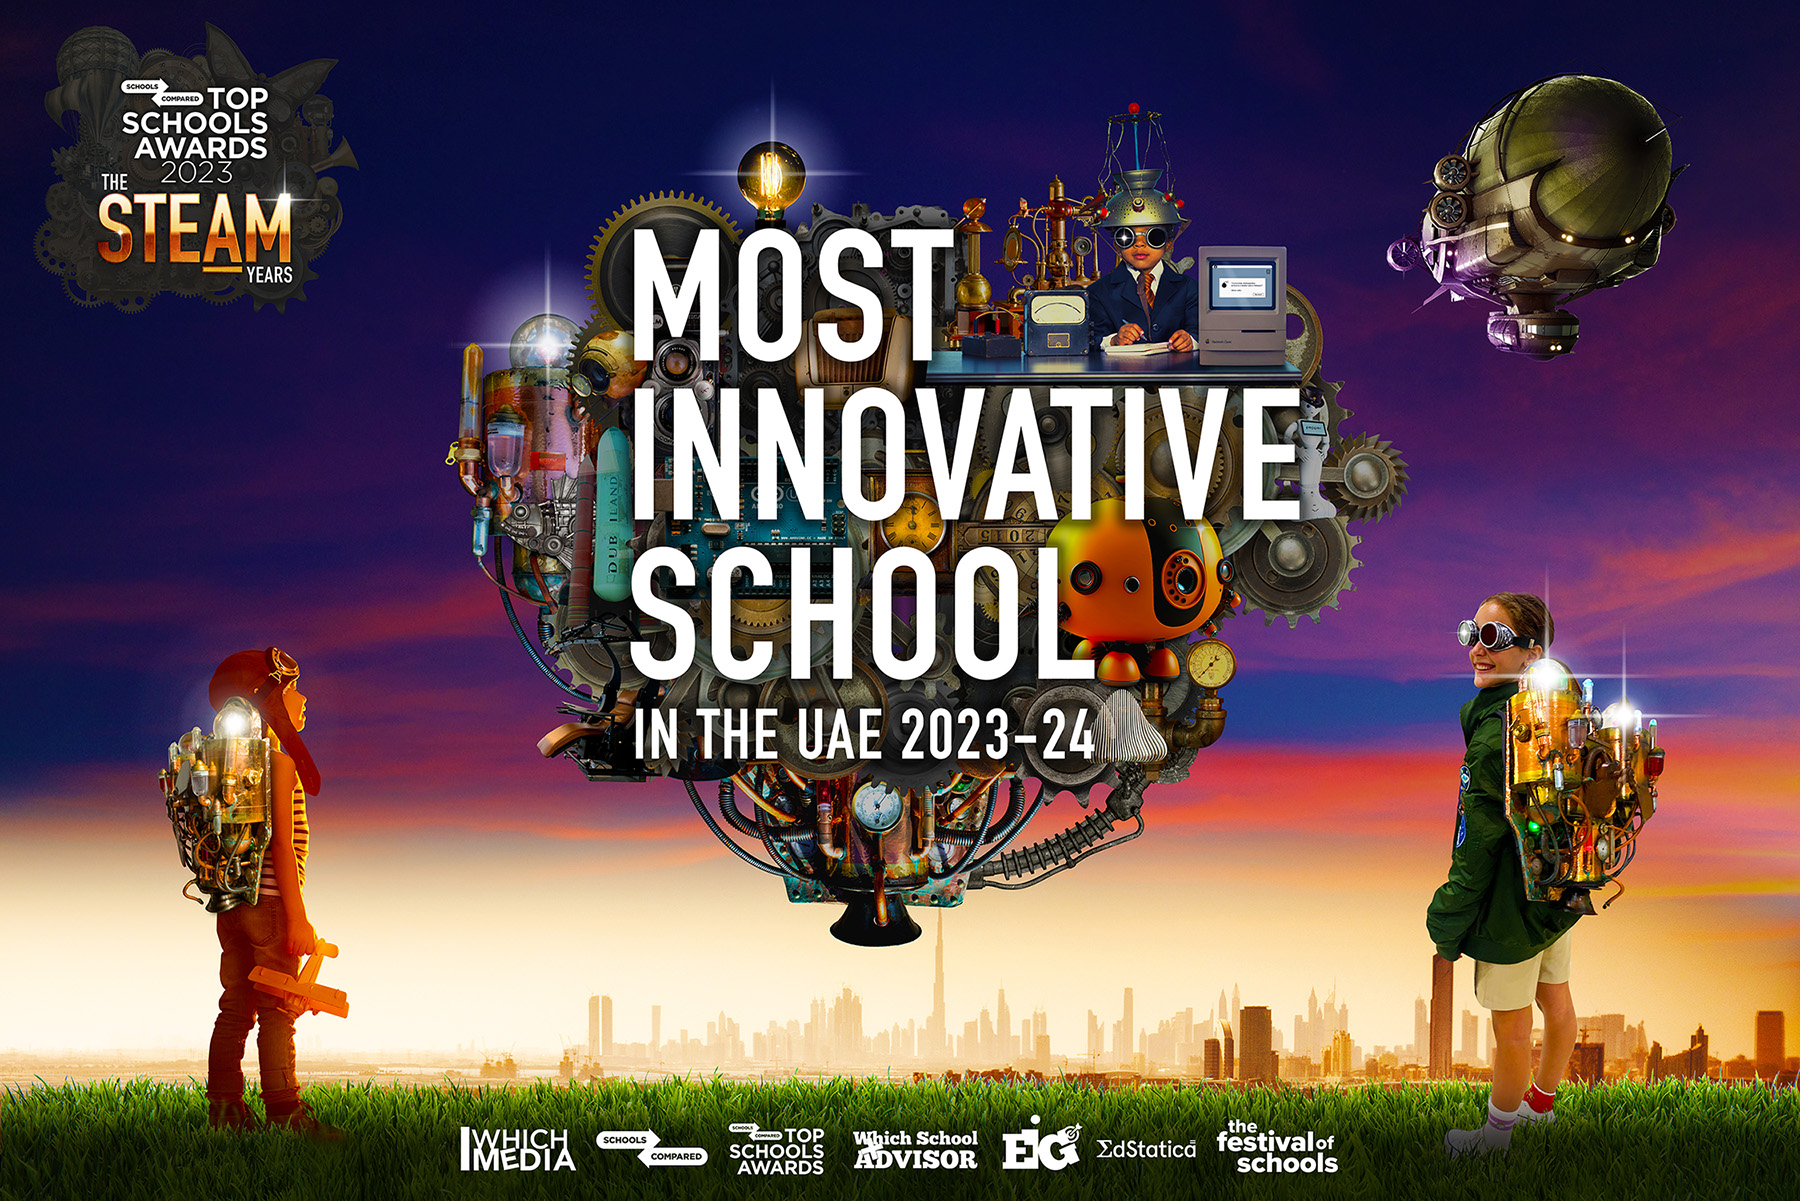 Award for Innovation. Most innovative School in the UAE. Top Schools Awards 2023